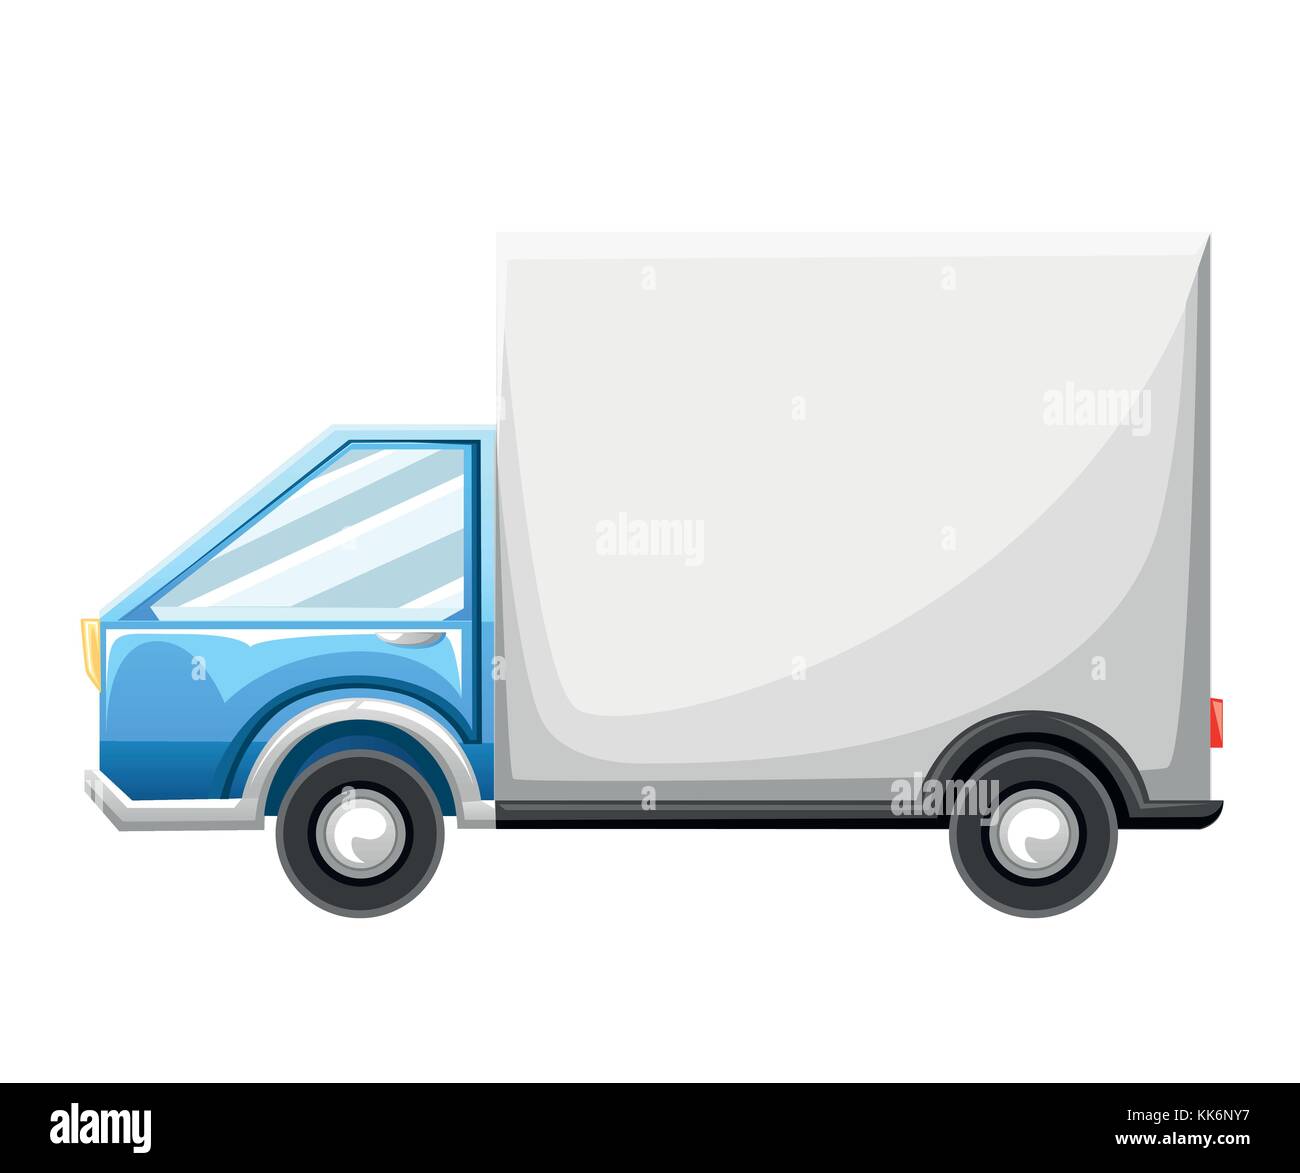 Truck delivery vector illustration isolated on background. Truck car in flat style. Trucking and delivery concept design. Web site page and mobile app Stock Vector